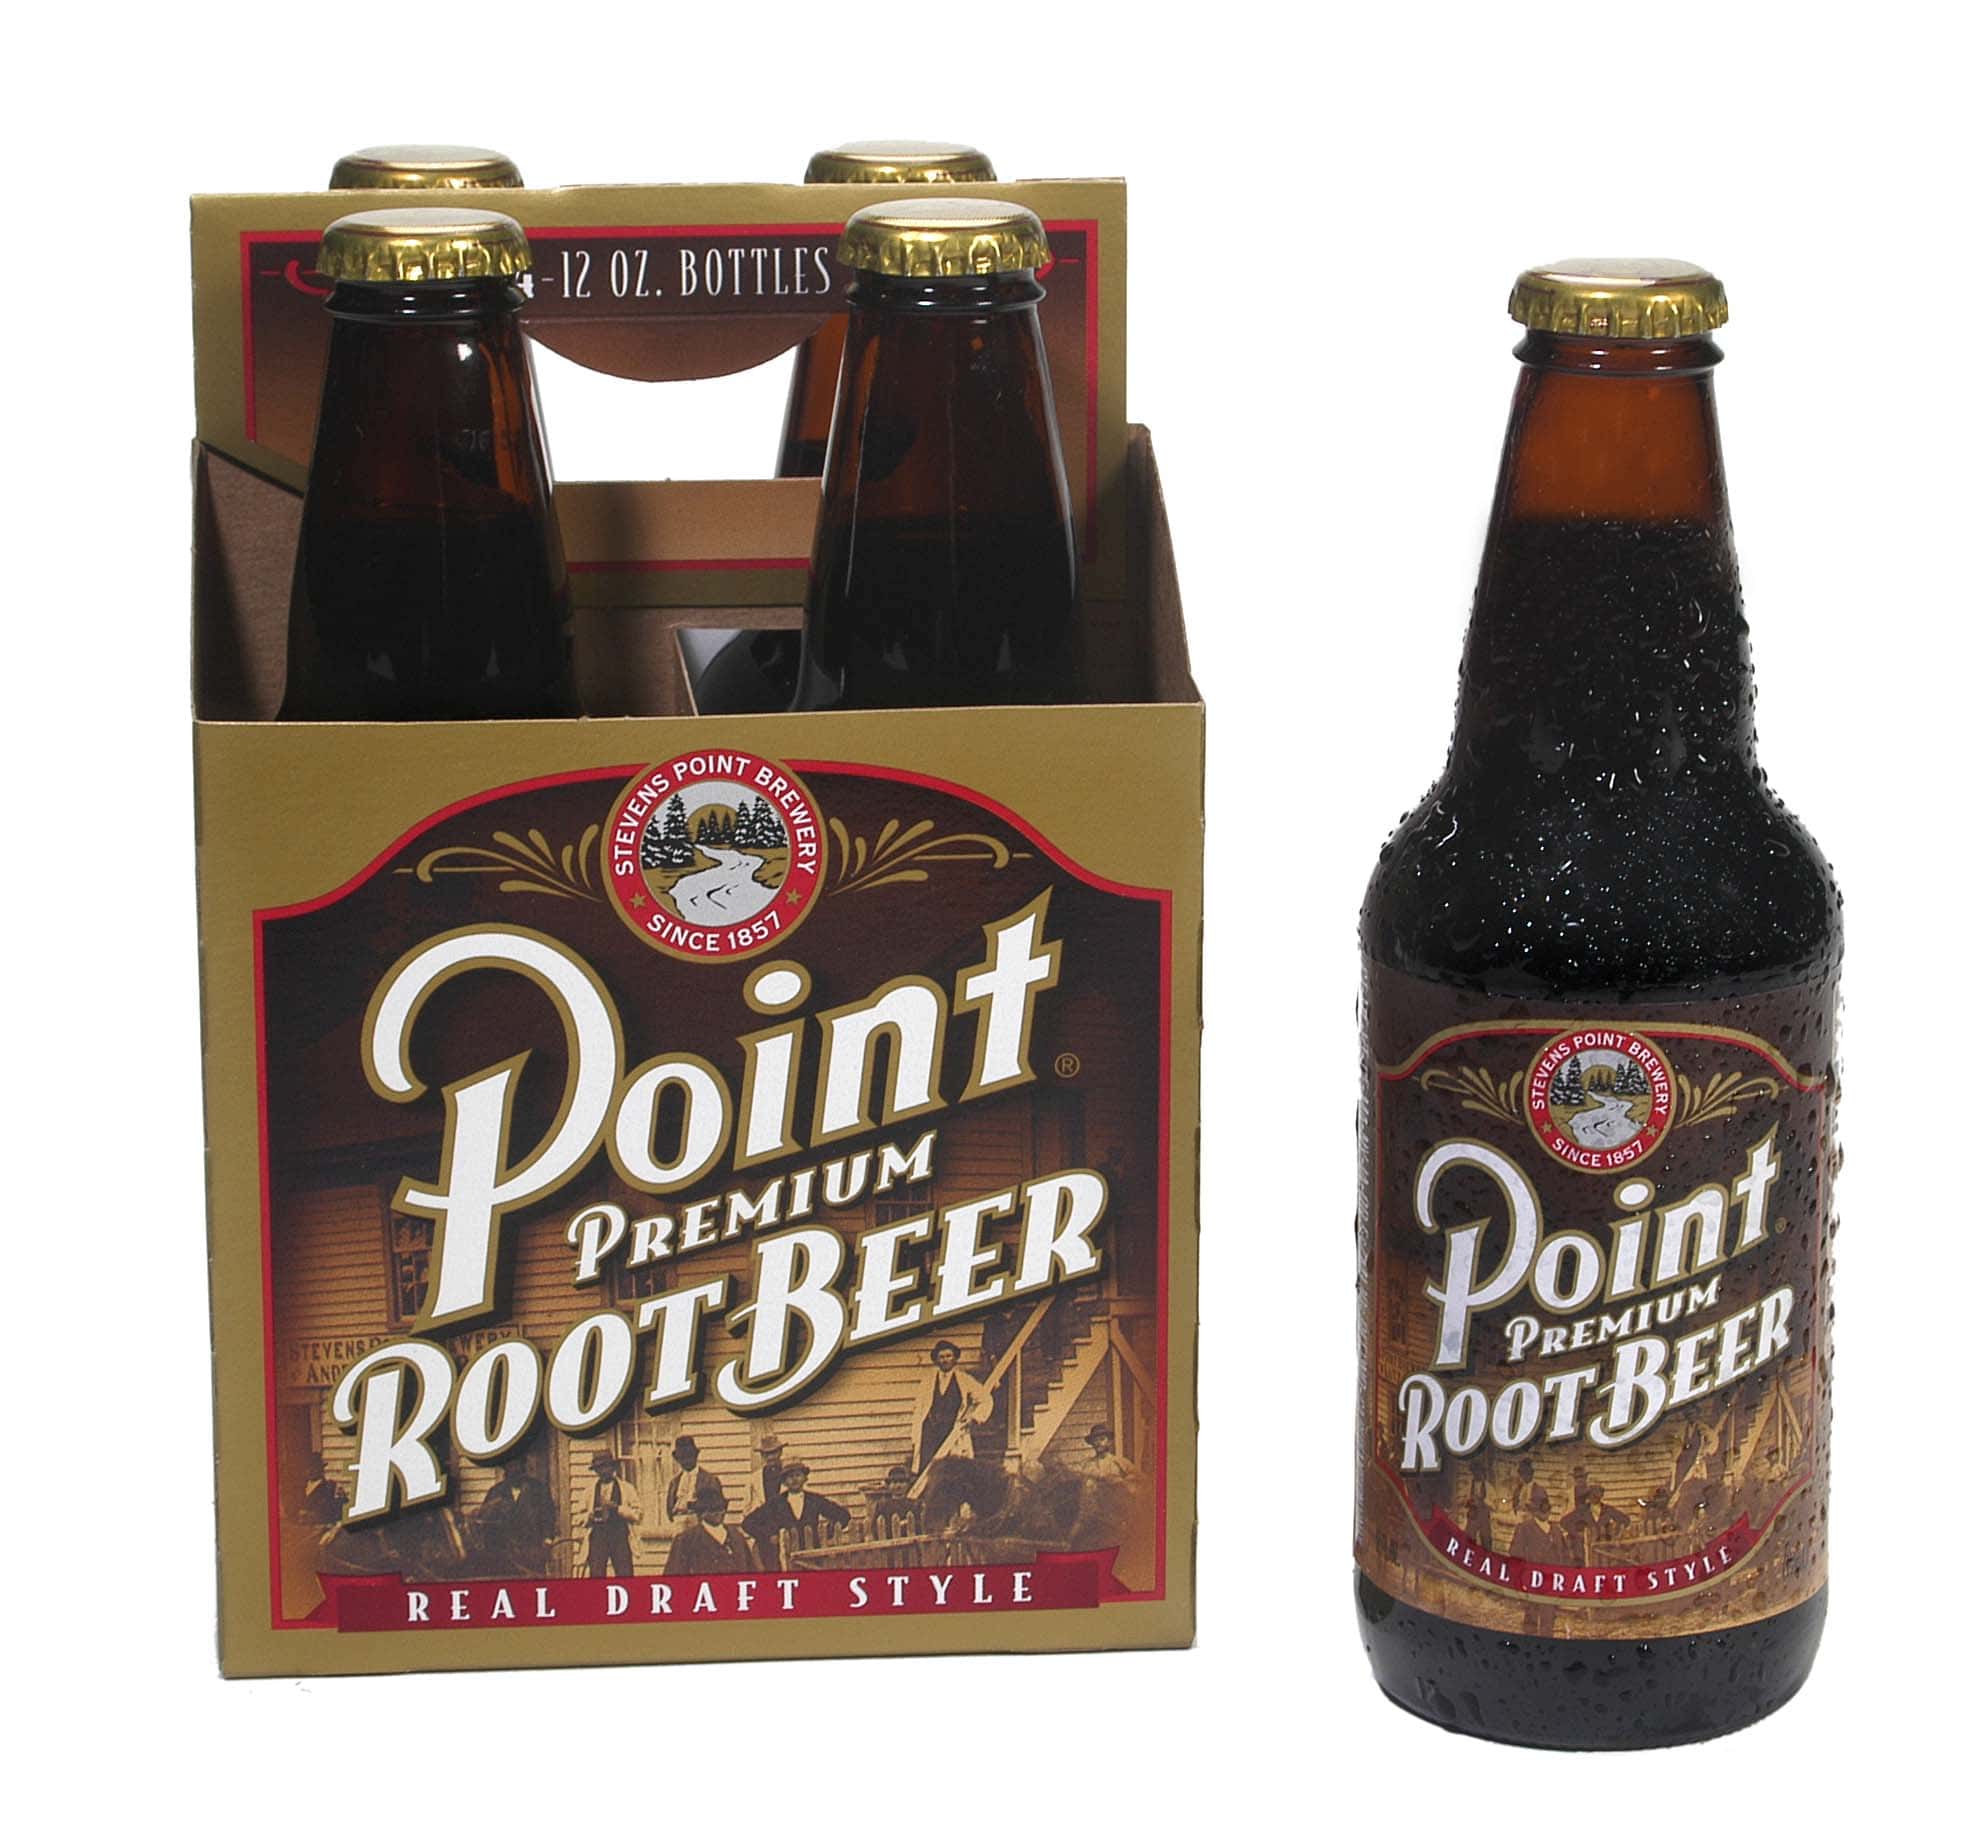 4-pack of Root Beer with a single bottle sitting separately to the right of the 4-pack.